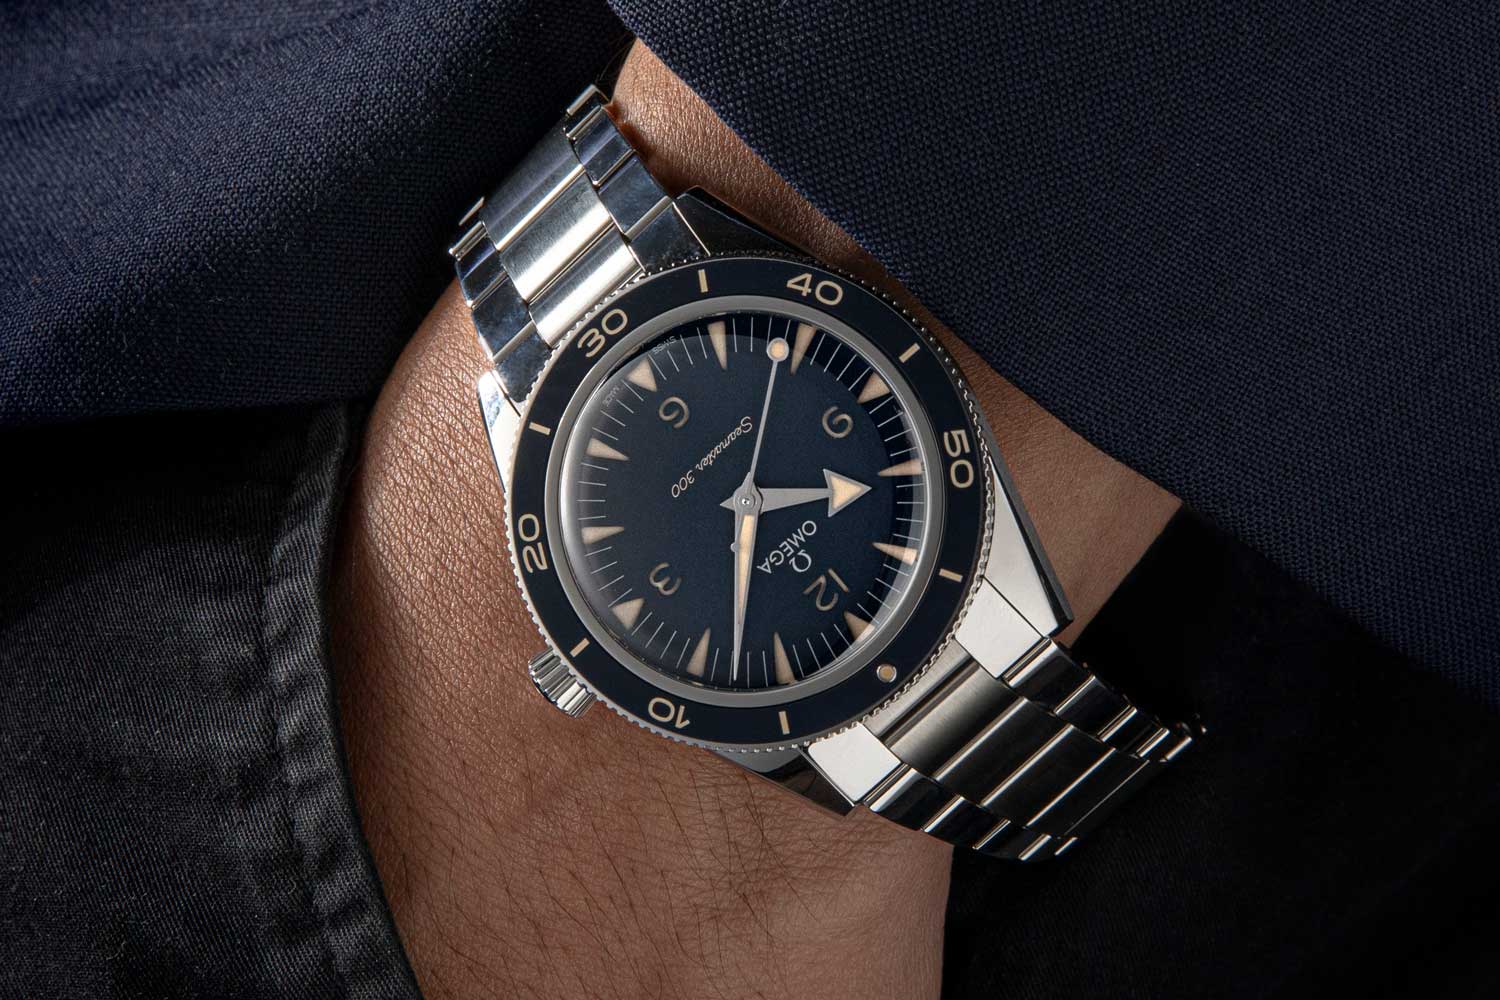 Offered in a steel case with blue or black dials, the new Seamaster 300 features the famous lollipop hand that was first seen in Seamasters like the reference 1475-61 from 1962 (©Revolution)